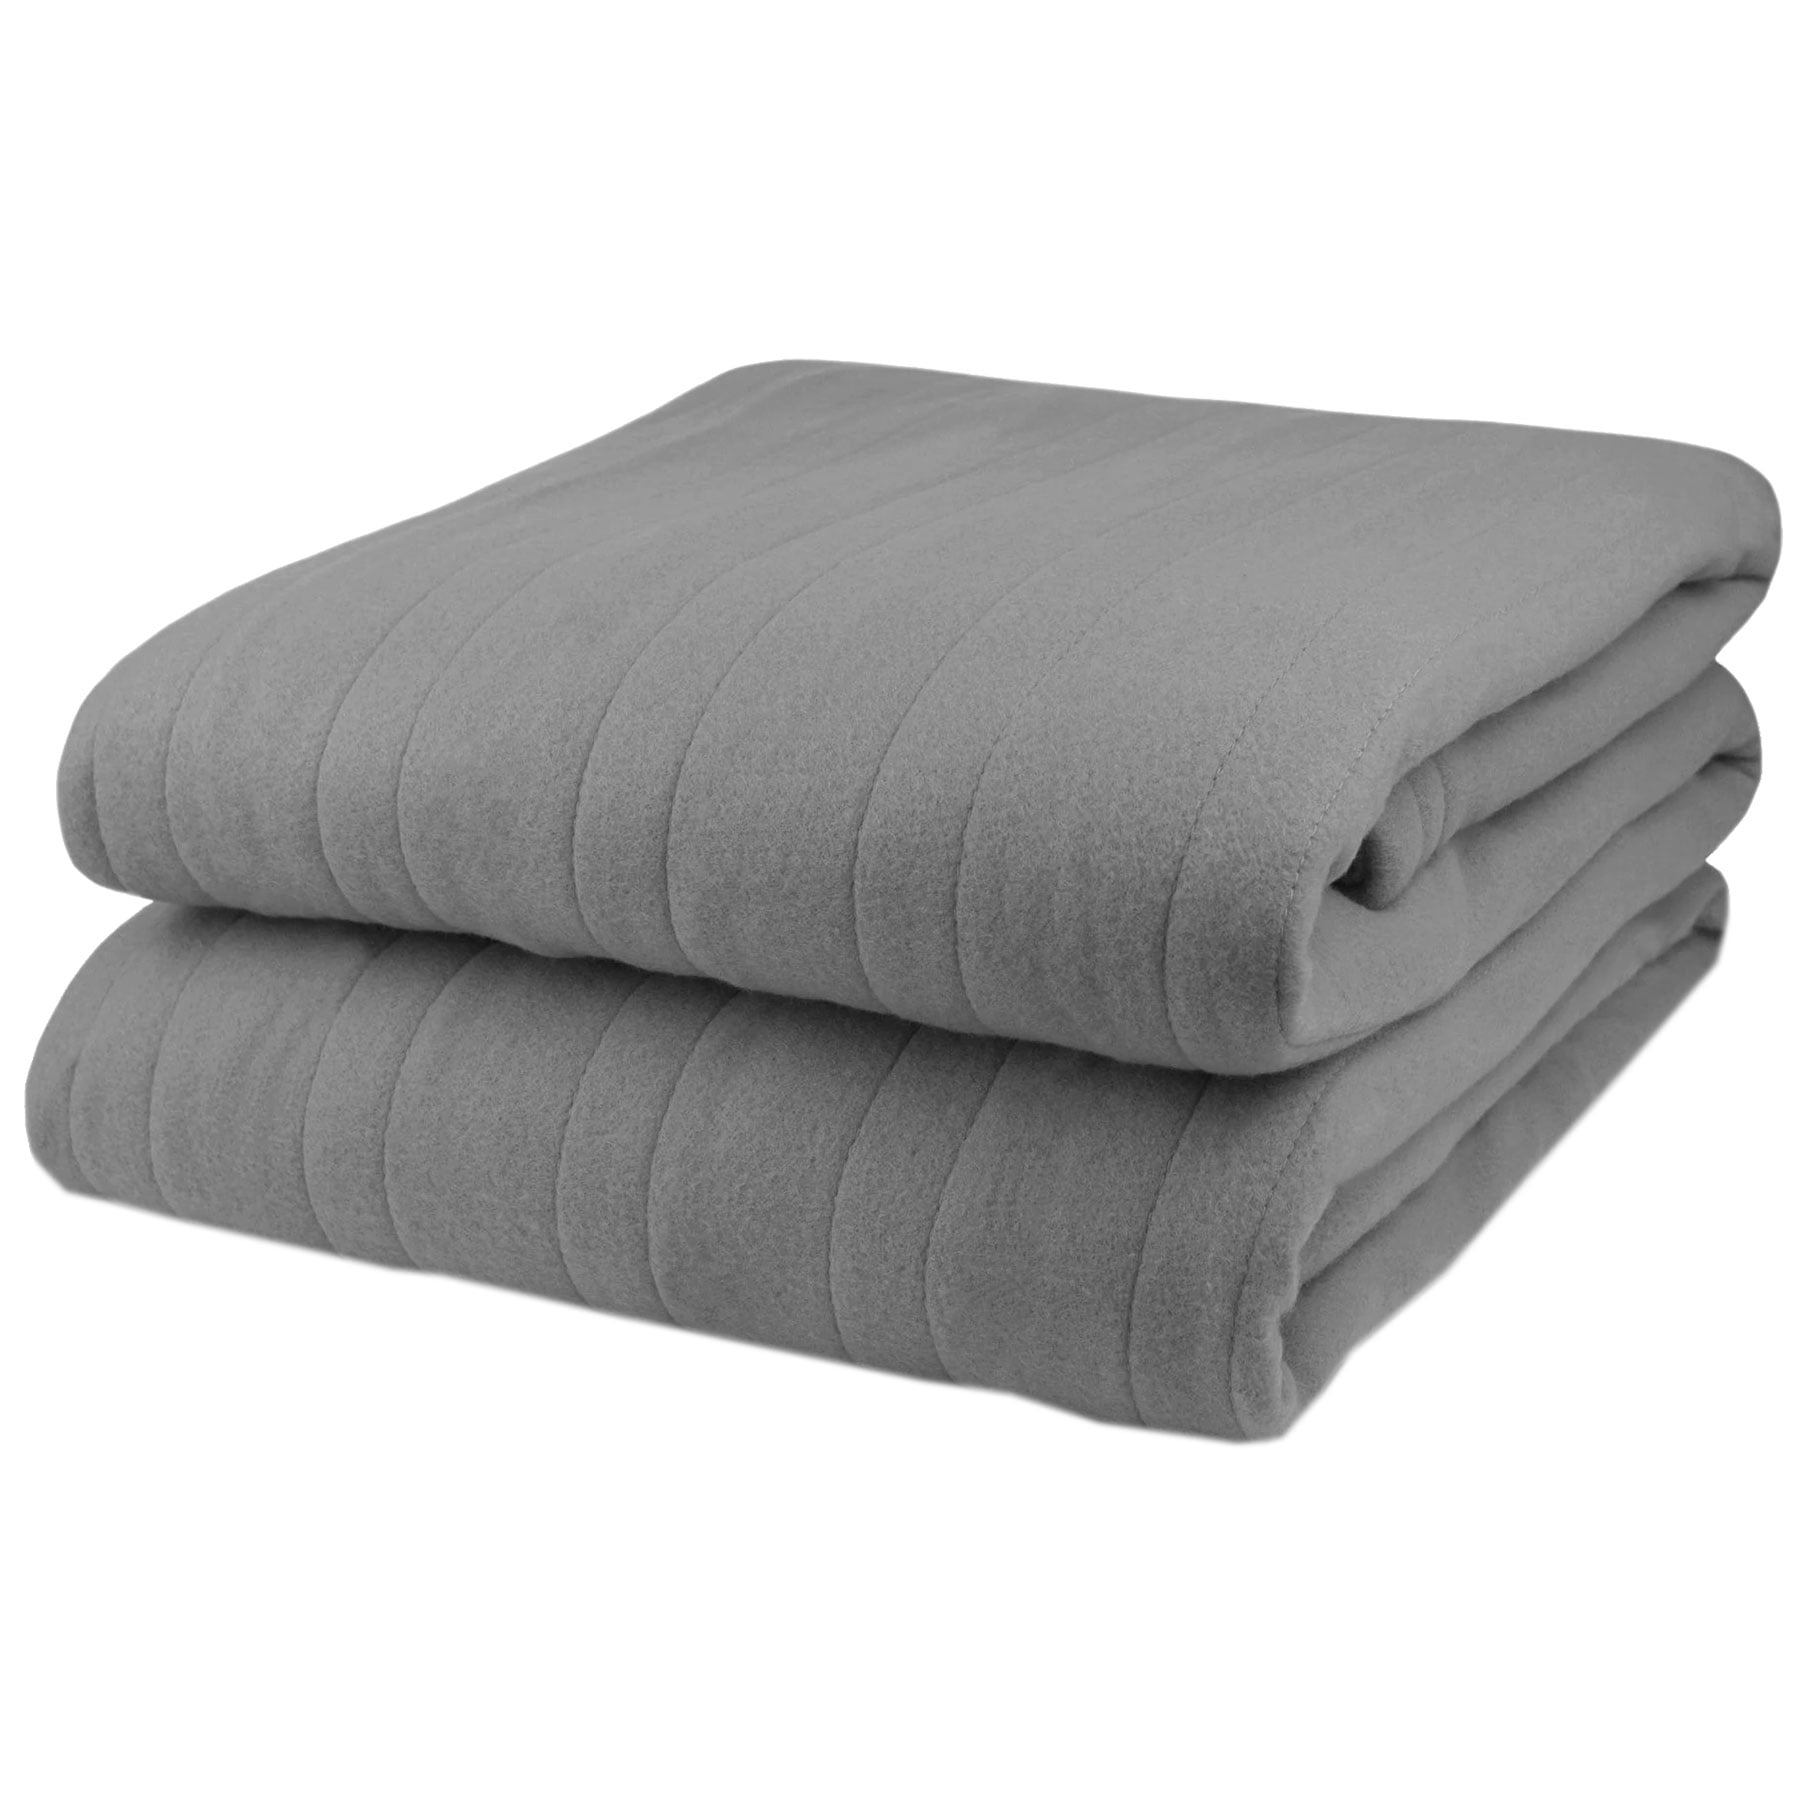 NEW Biddeford QUEEN Size Electric Heated Knit Fleece Blanket GRAY Soft Cozy Bed